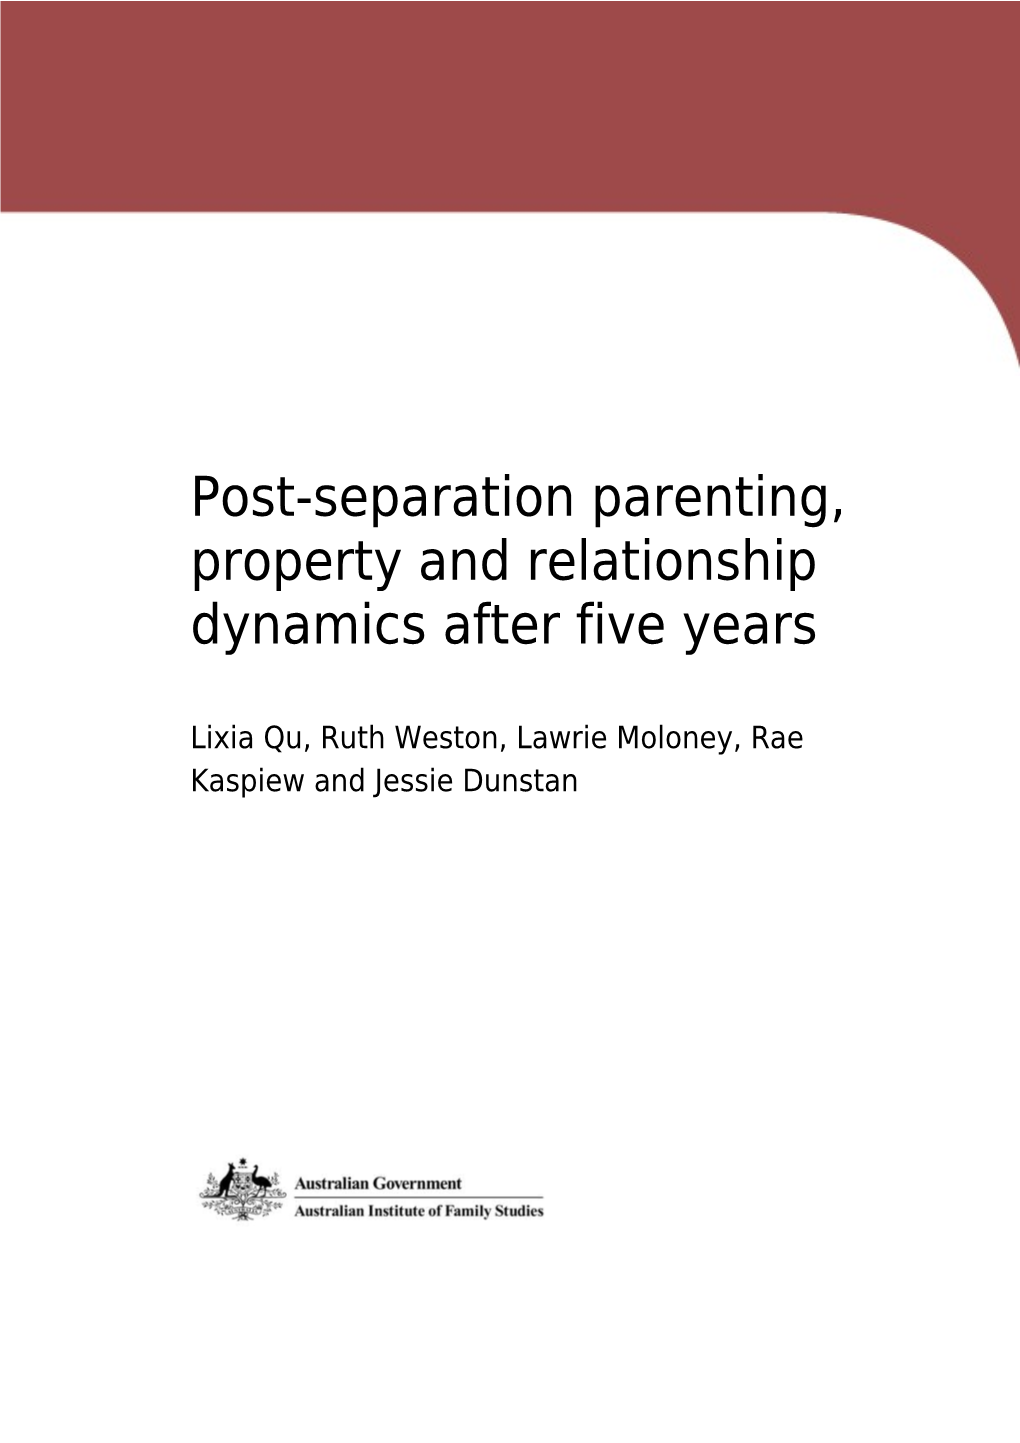 Post-Separation Parenting, Property and Relationship Dynamics After Five Years